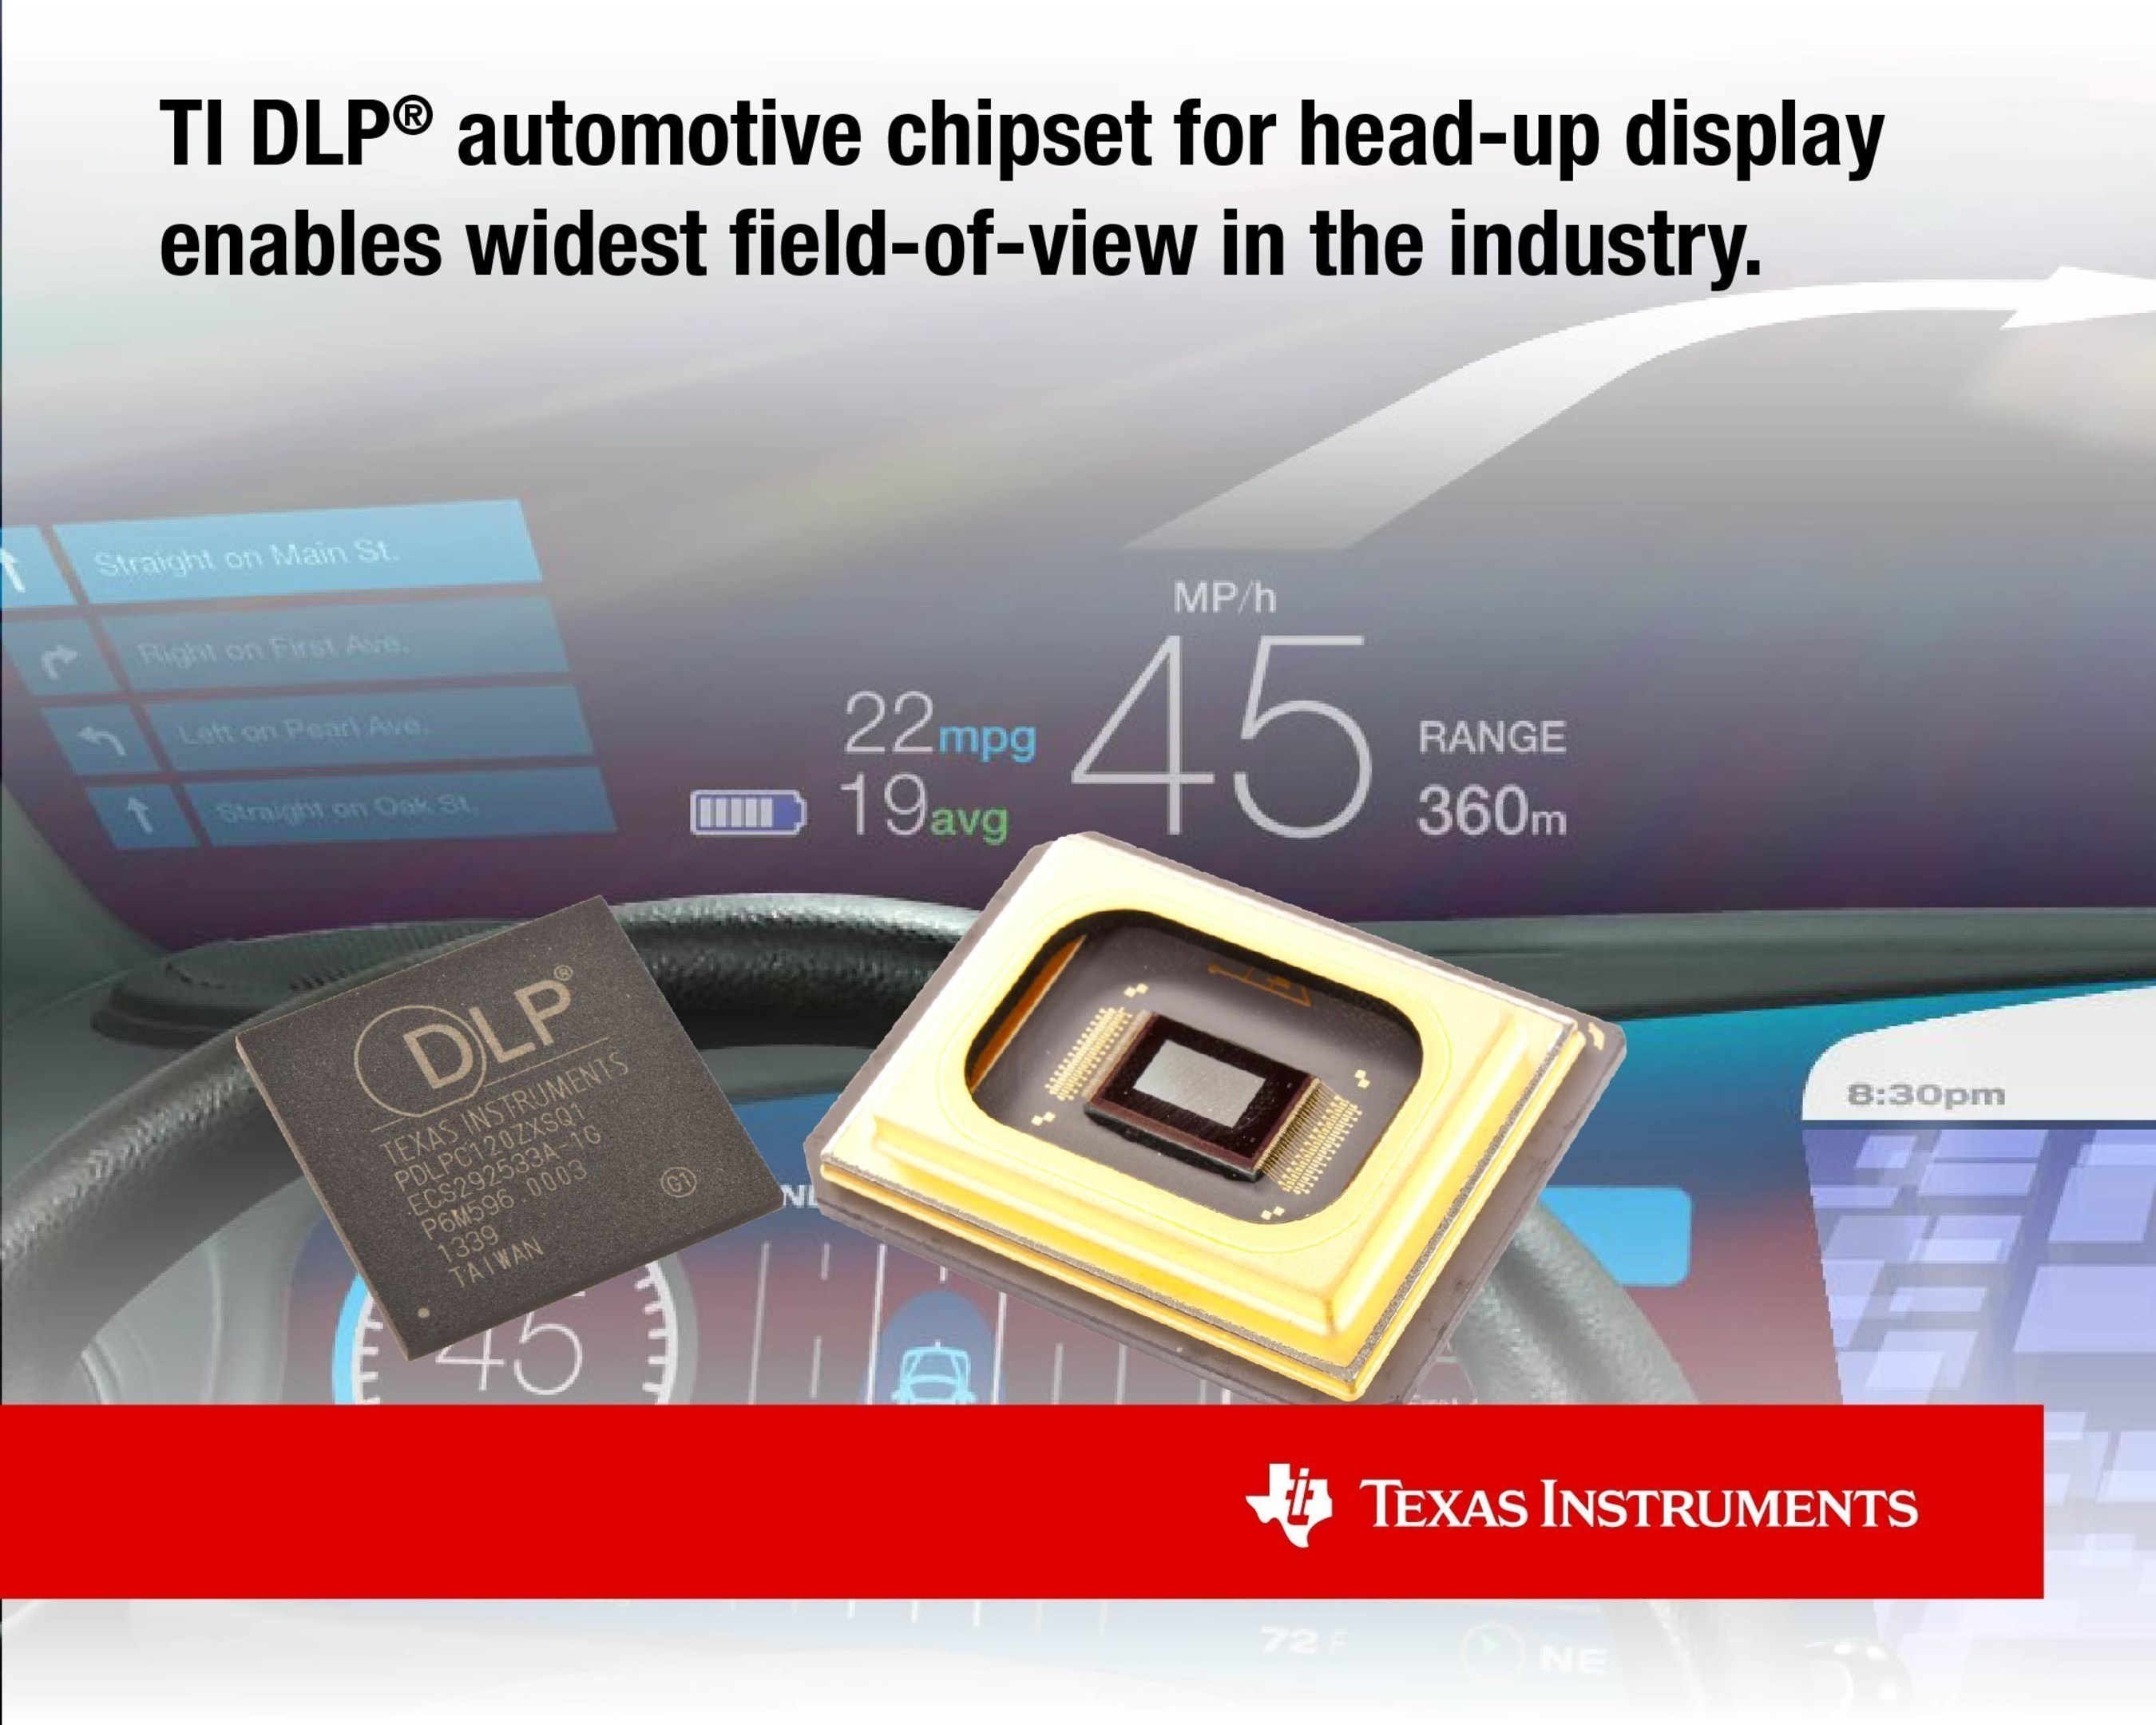 TI DLP automotive chipset for head-up display.